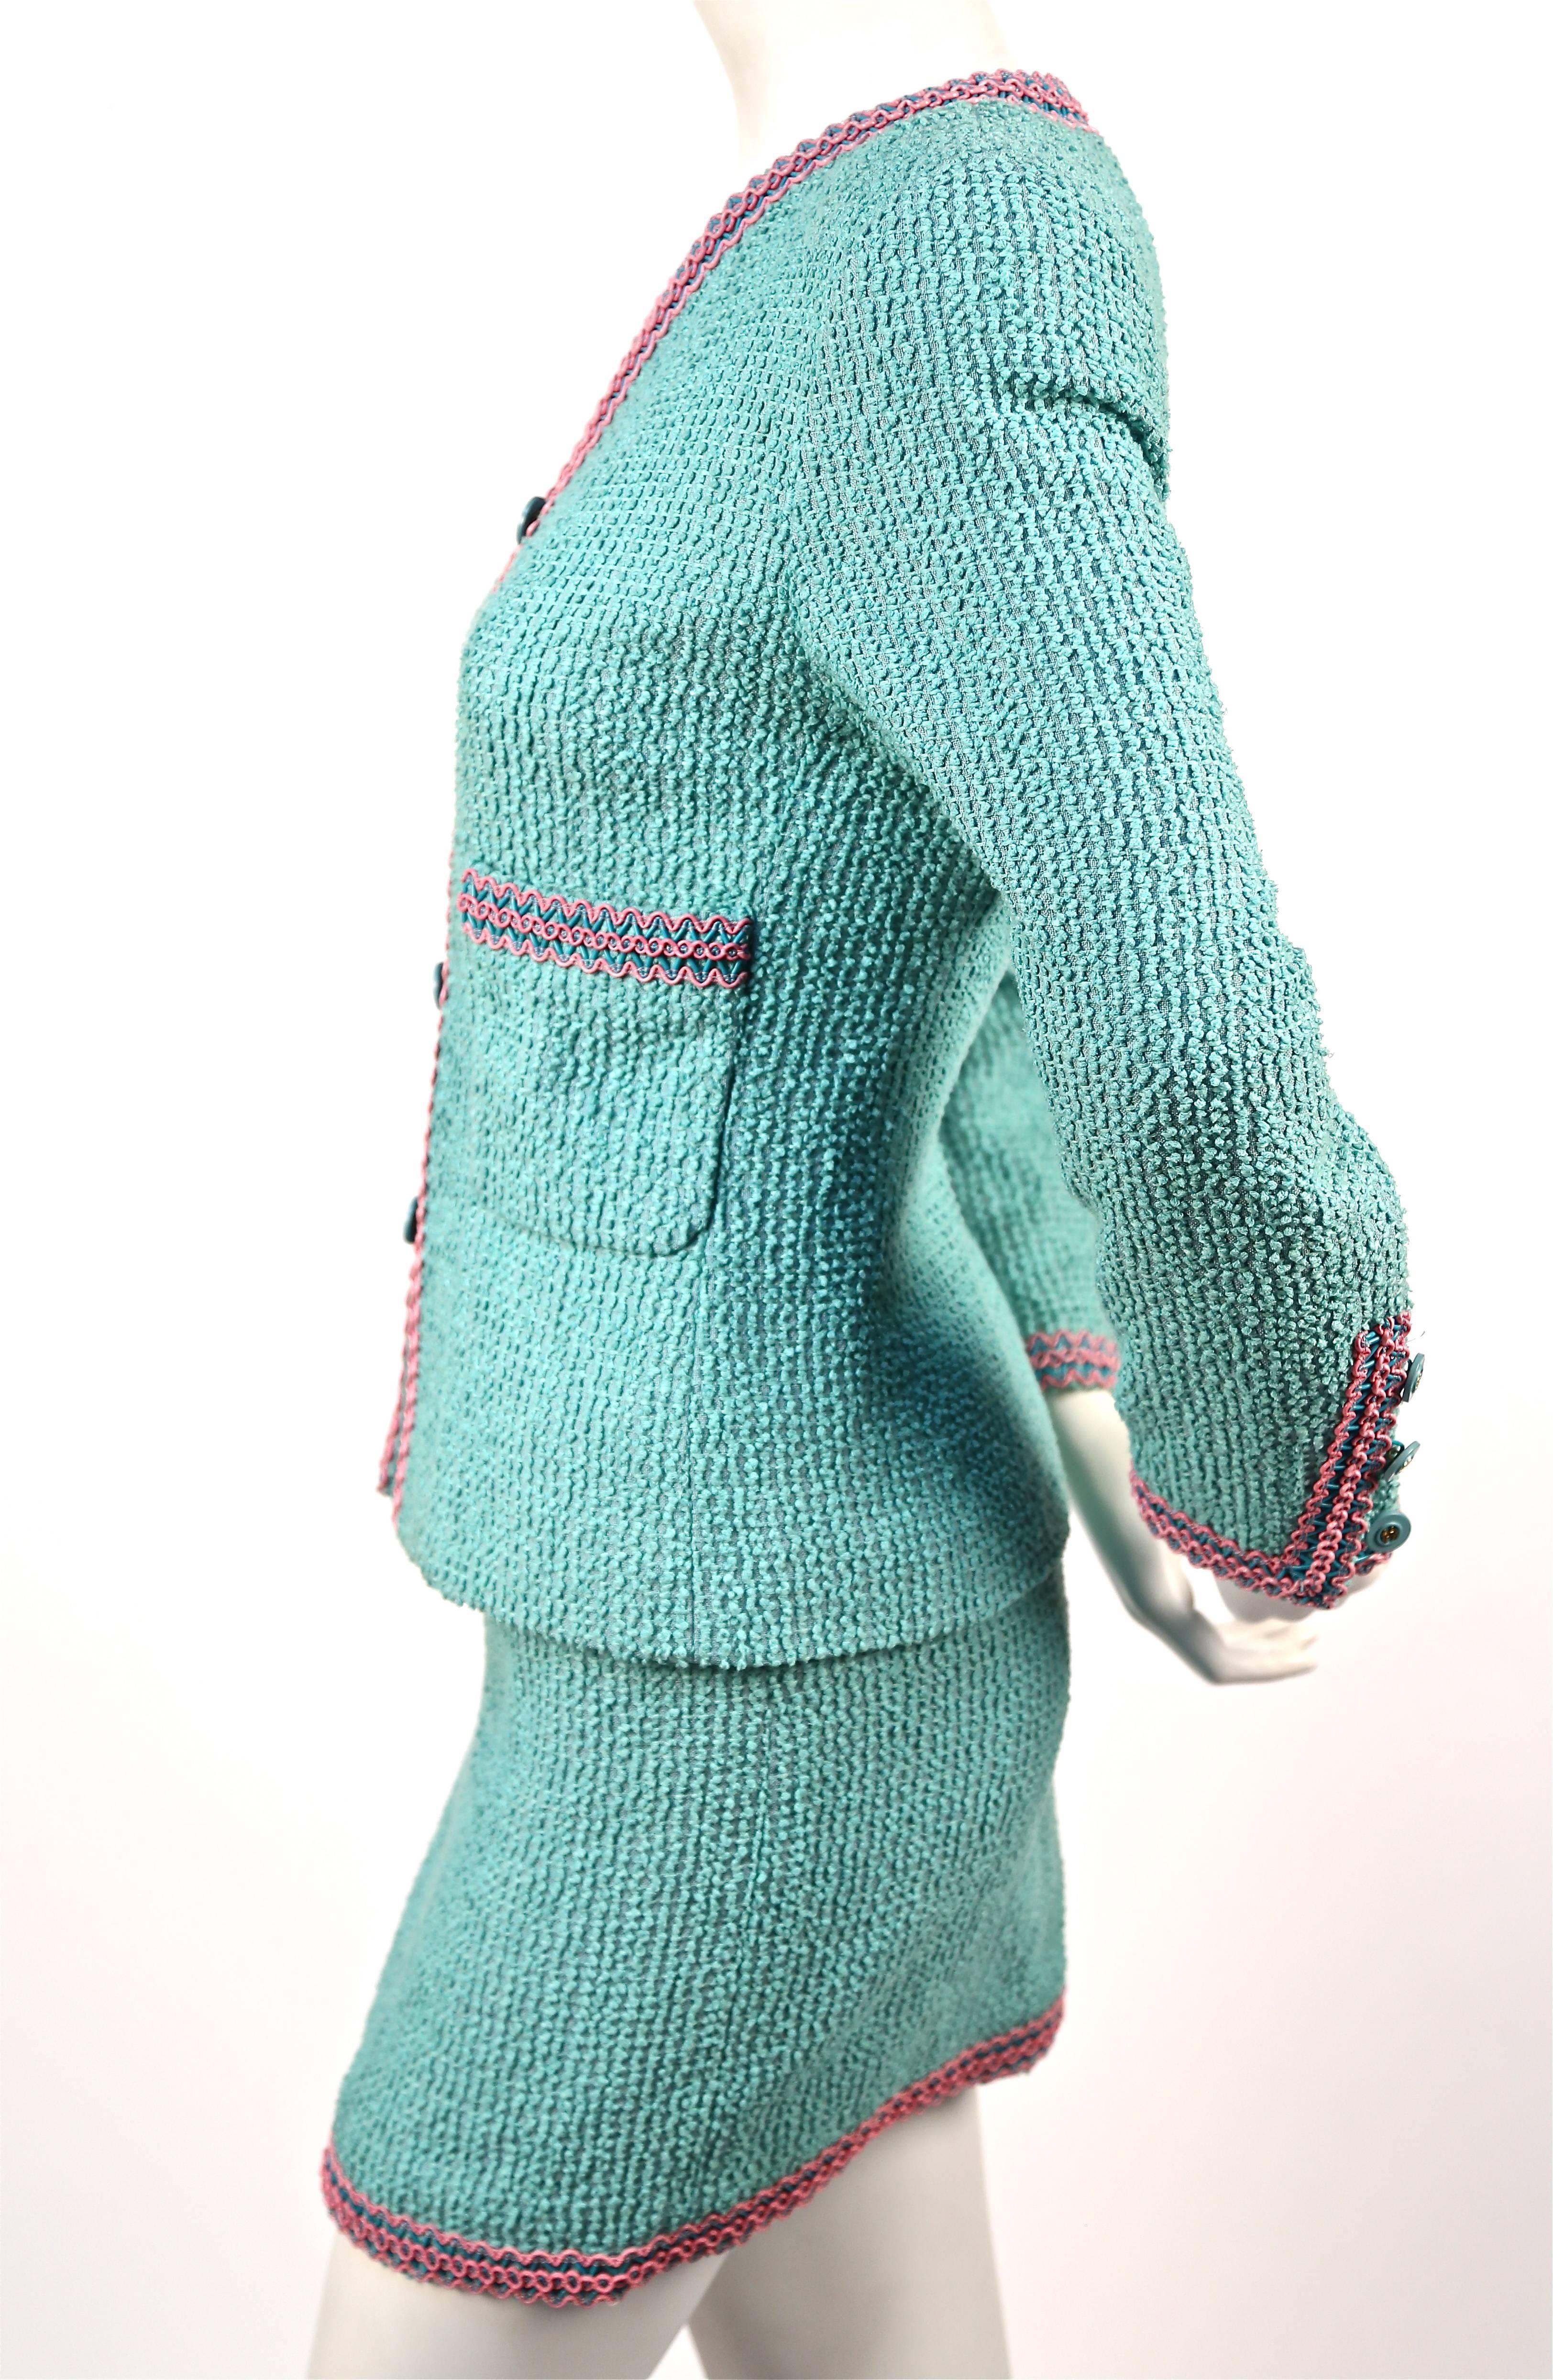 Very rare turquoise boucle 'Scoubidou' suit with braided plastic trim from Chanel as seen on the runway for Spring of 1994. Very well documented piece. French size 36. Approximate measurements for jacket: 15.5